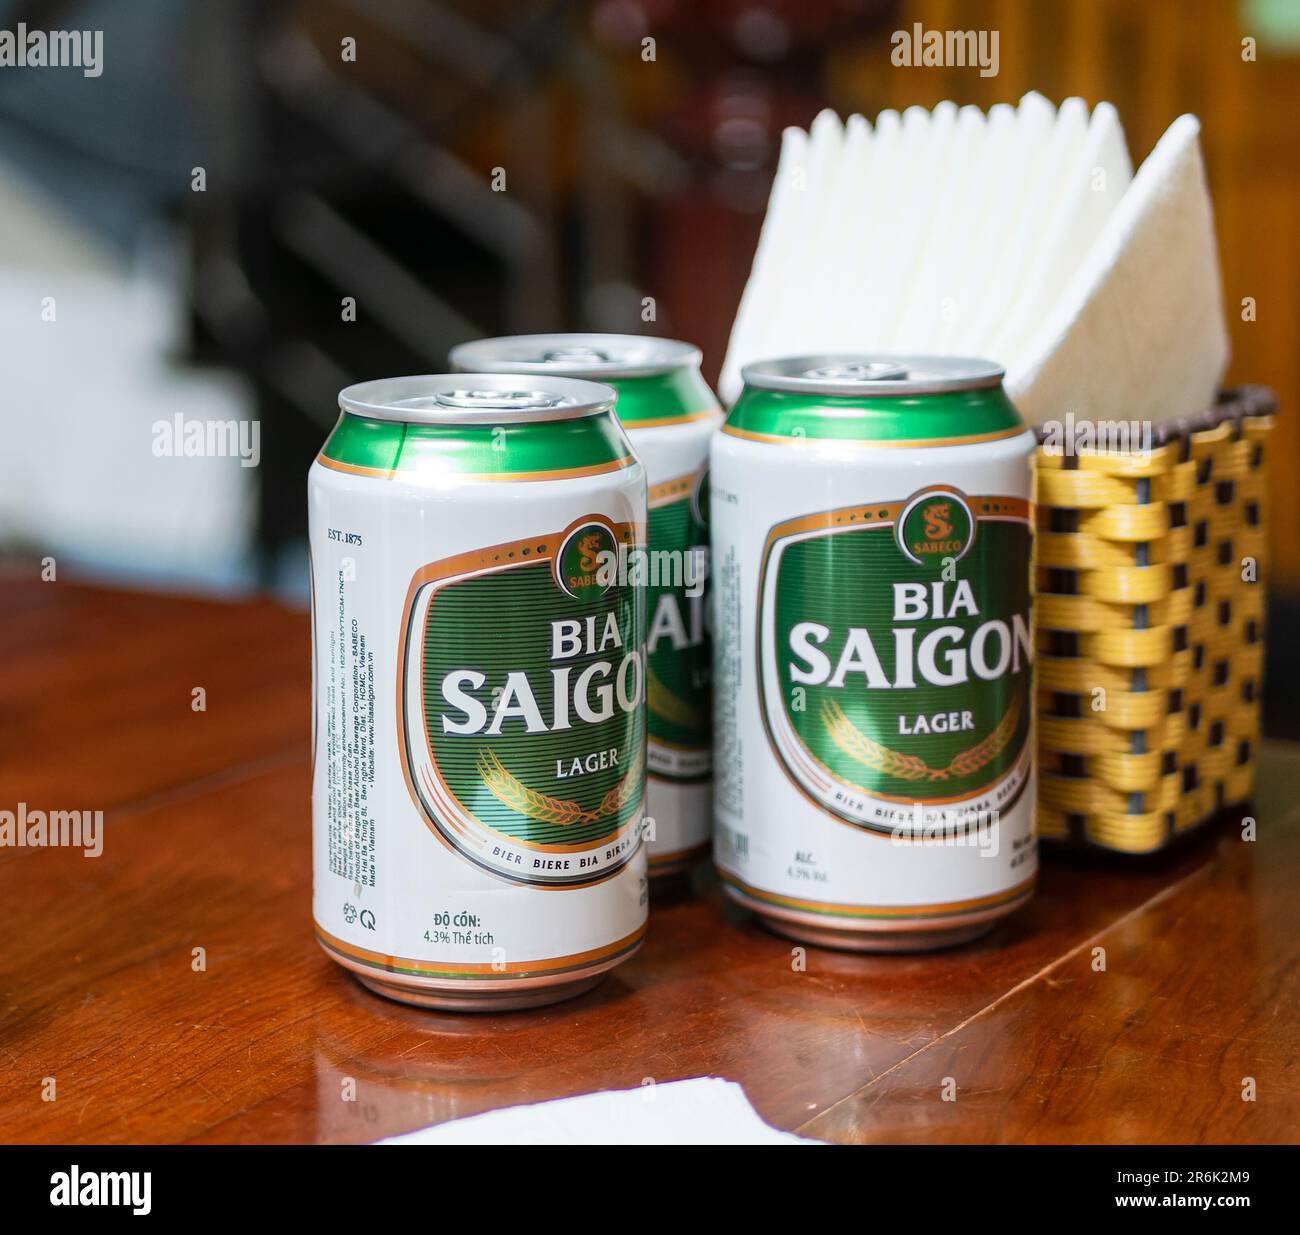 Three cans of Bia Saigon, Saigon Beer, at a restaurant in Vietnam. Bia Saigon is one of the most popular beers in Vietnam, produced by Vietnam's large Stock Photo